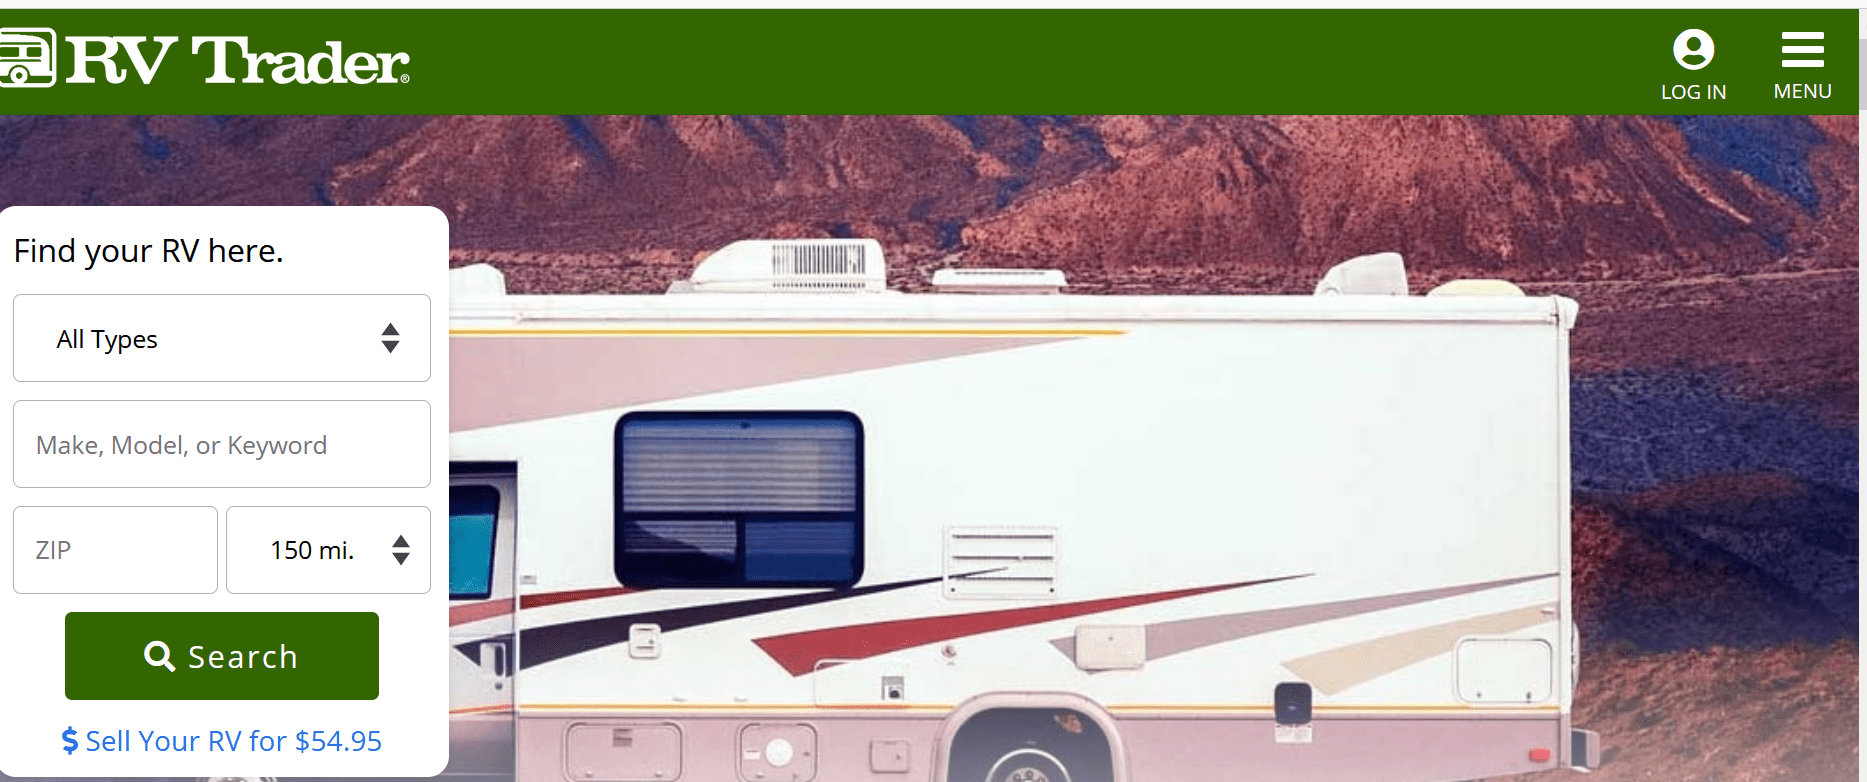 RV Trader is helpful for locating used Class A RVs for sale.